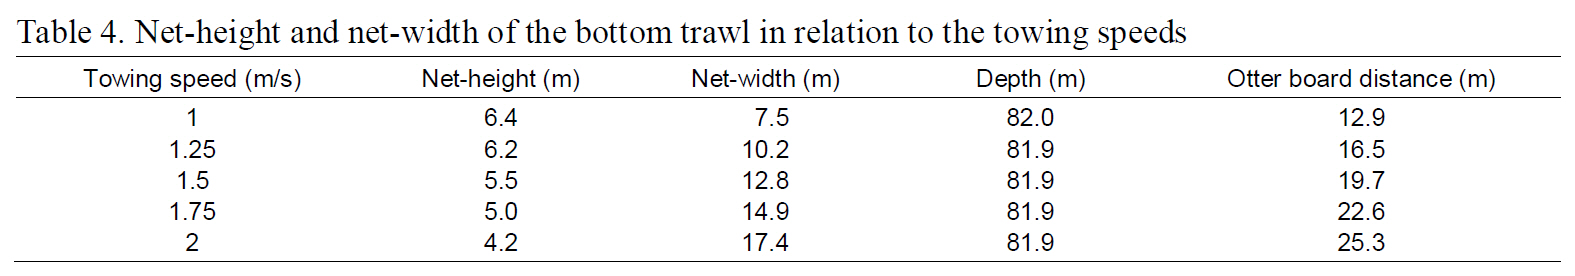 Net-height and net-width of the bottom trawl in relation to the towing speeds